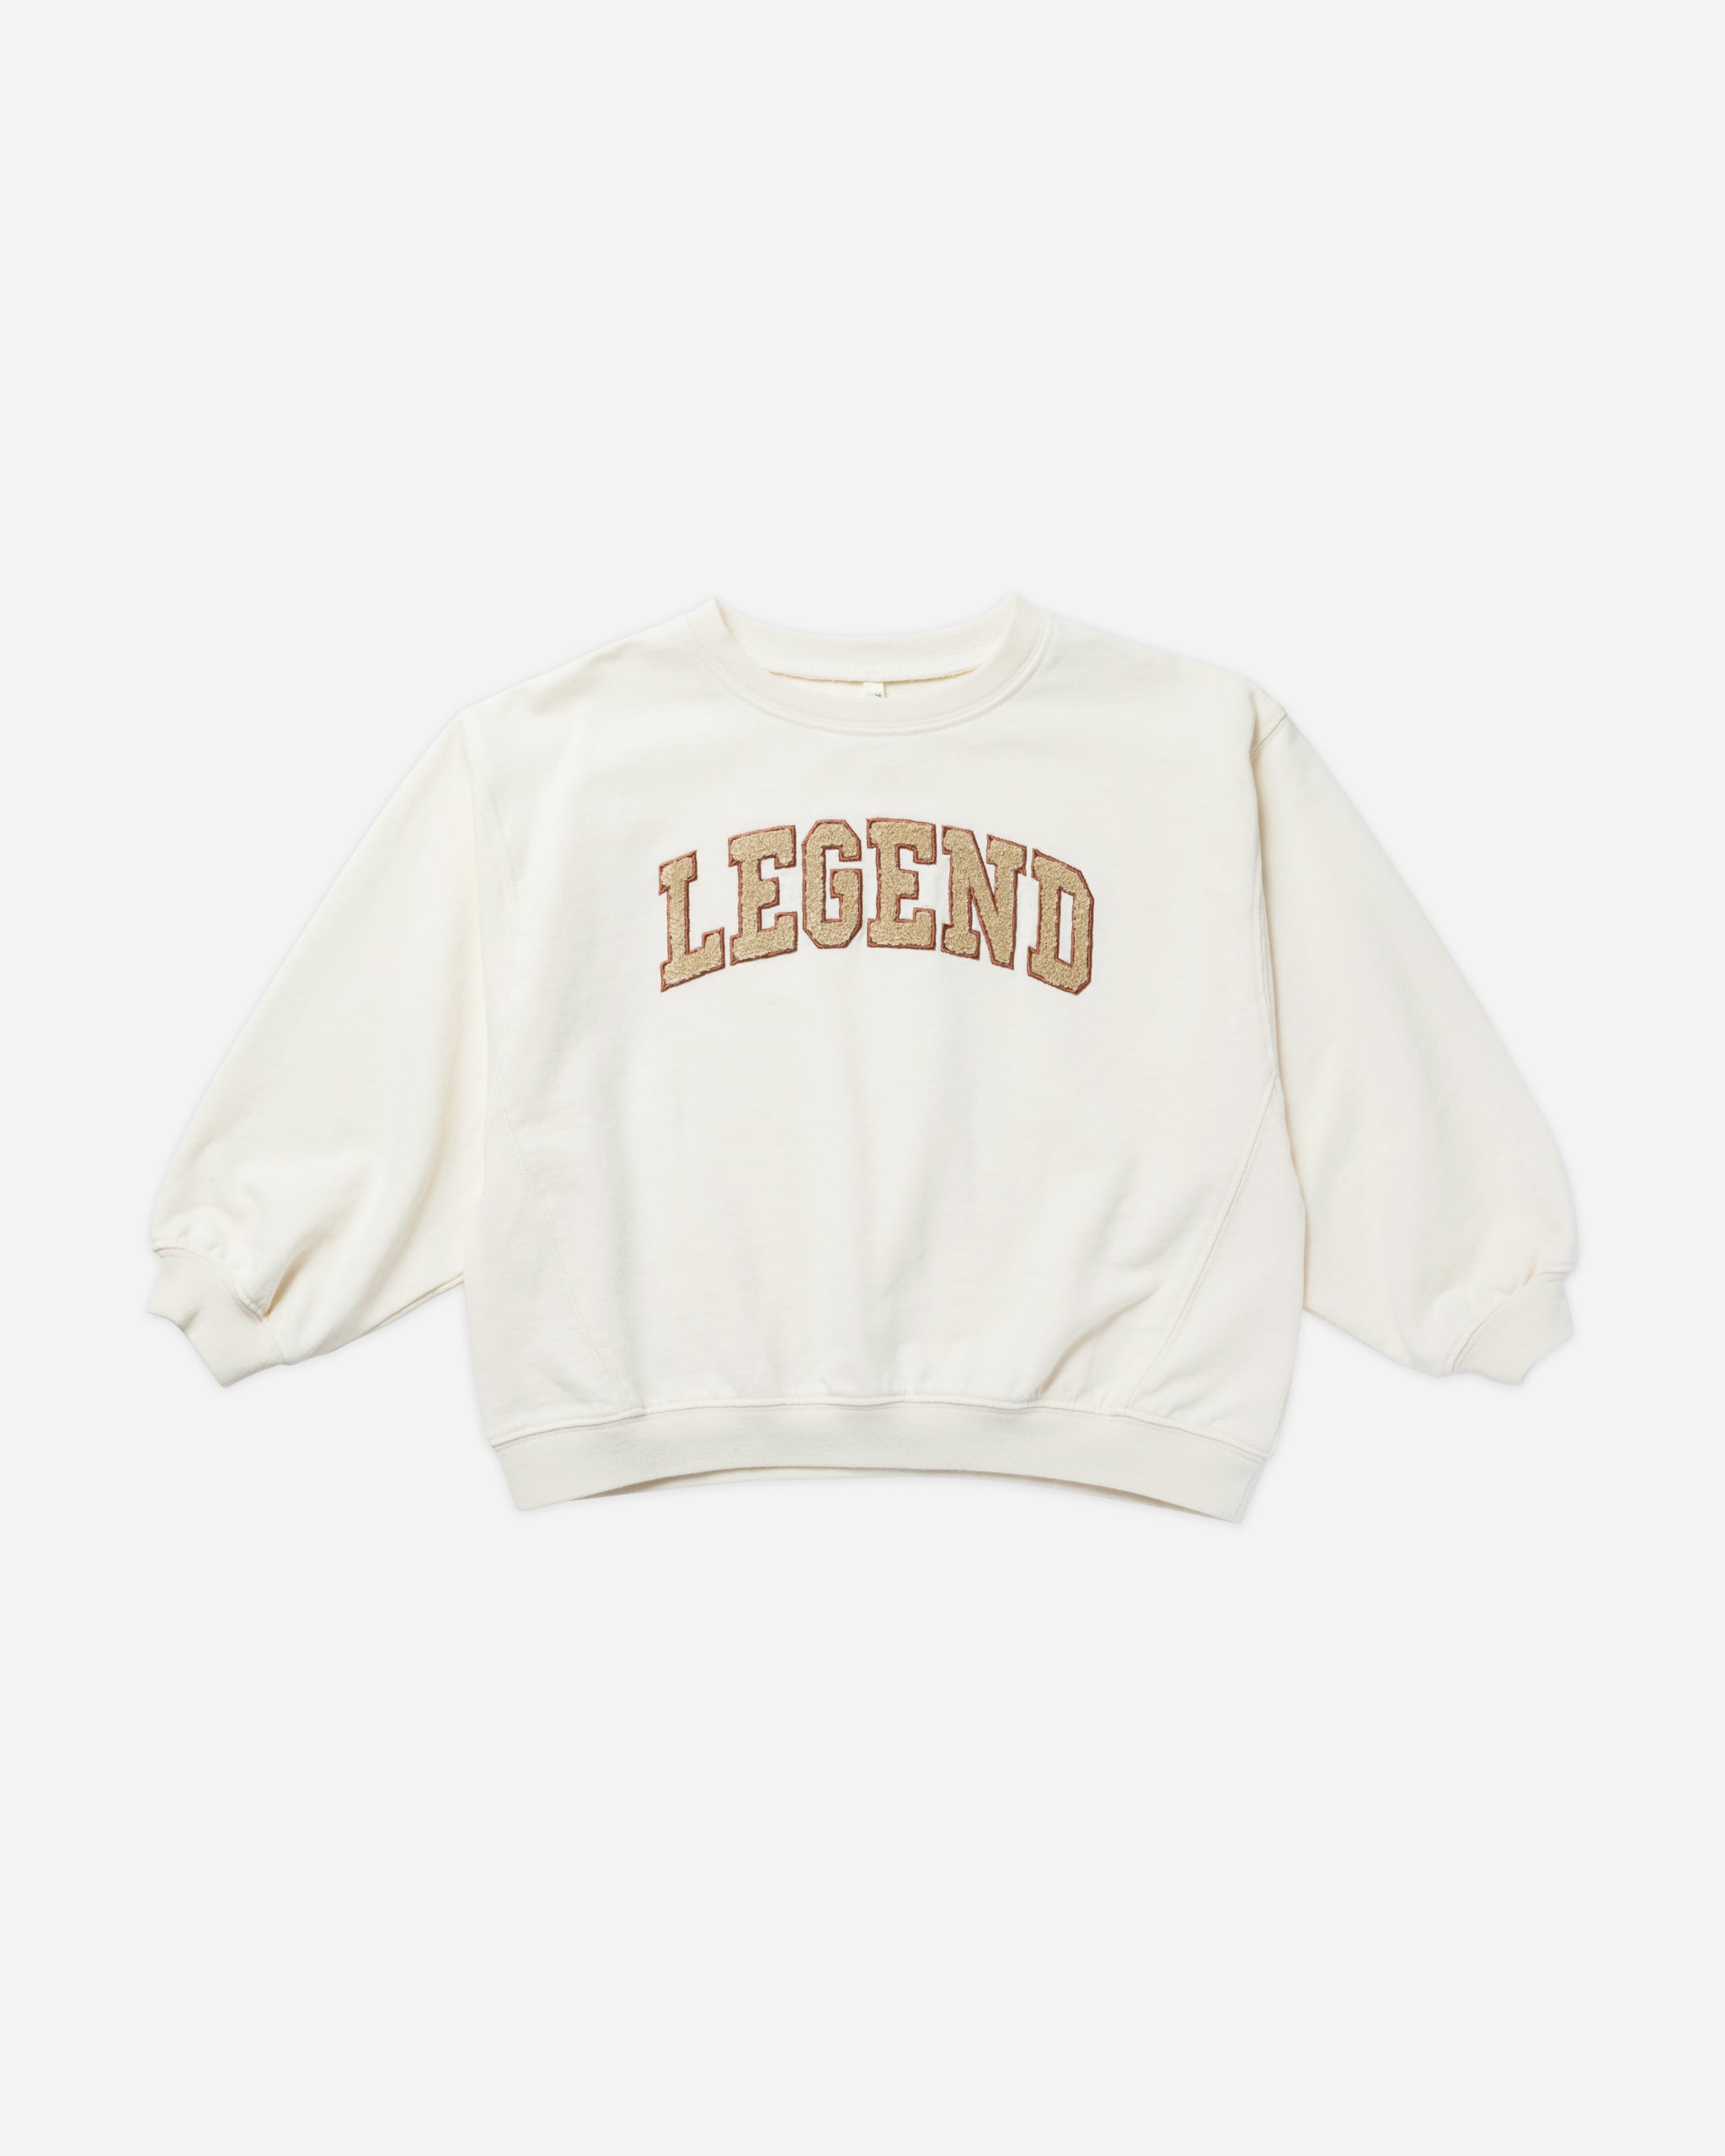 Oversized Crew Sweatshirt || Legend - Rylee + Cru | Kids Clothes | Trendy Baby Clothes | Modern Infant Outfits |